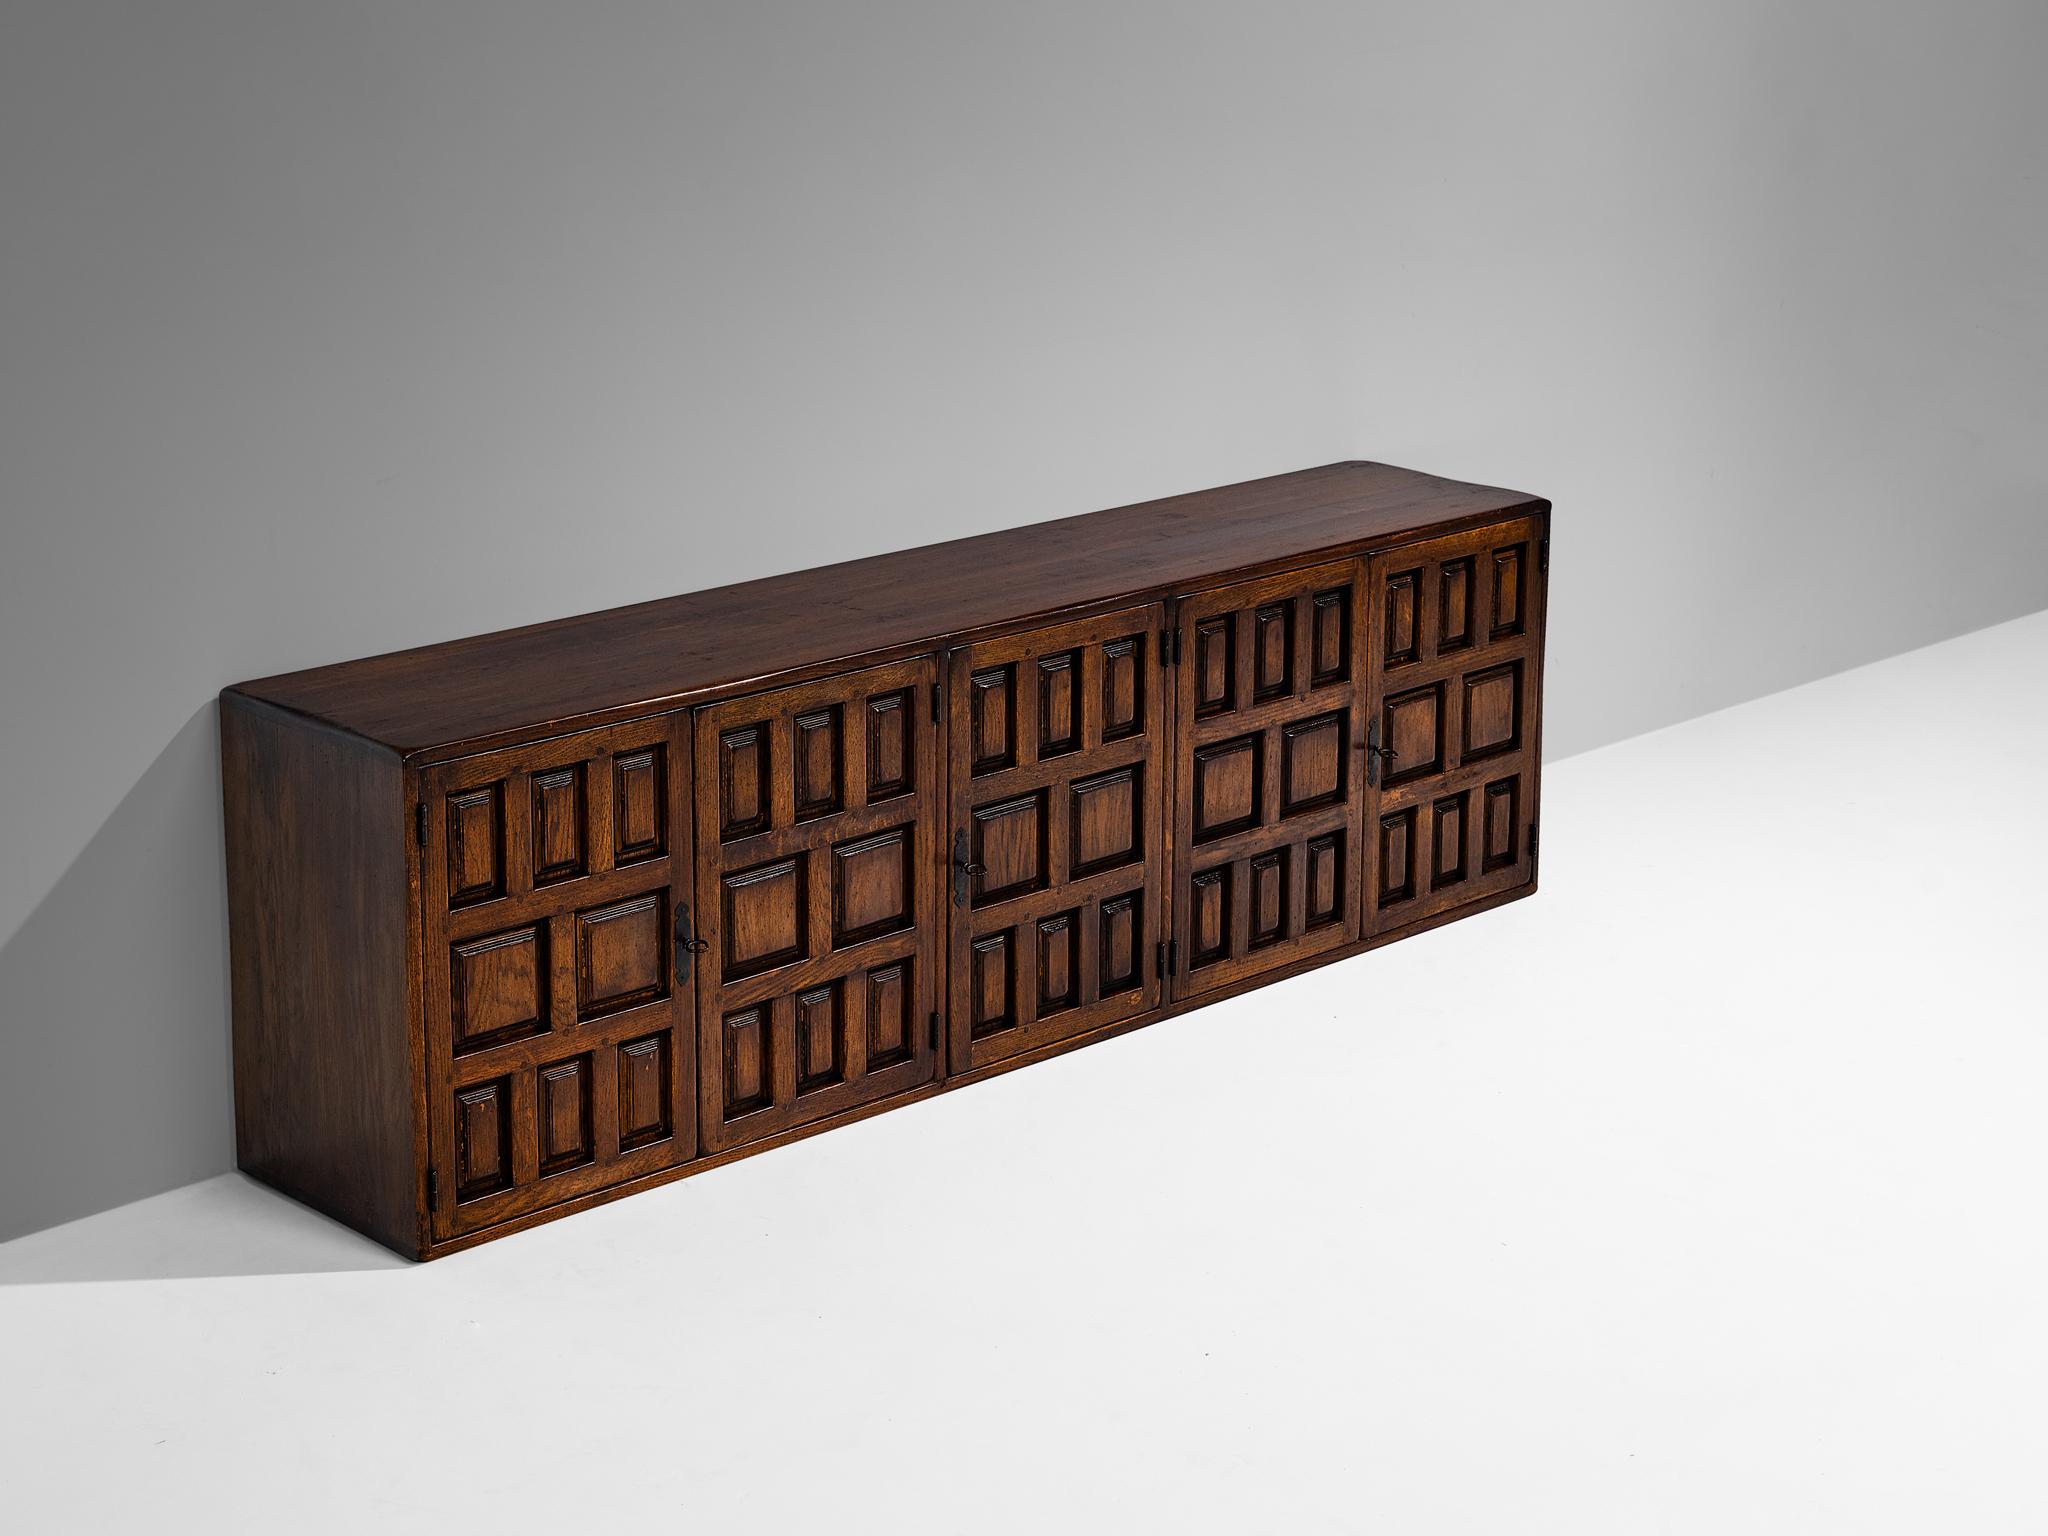 Sideboard, stained ash, iron, Spain, 1960s

This cabinet originates from Spain and shows the decorative characteristics of the 16th century Castilian furniture design. The carved geometric shapes on the door panels immediately catch the eye and are